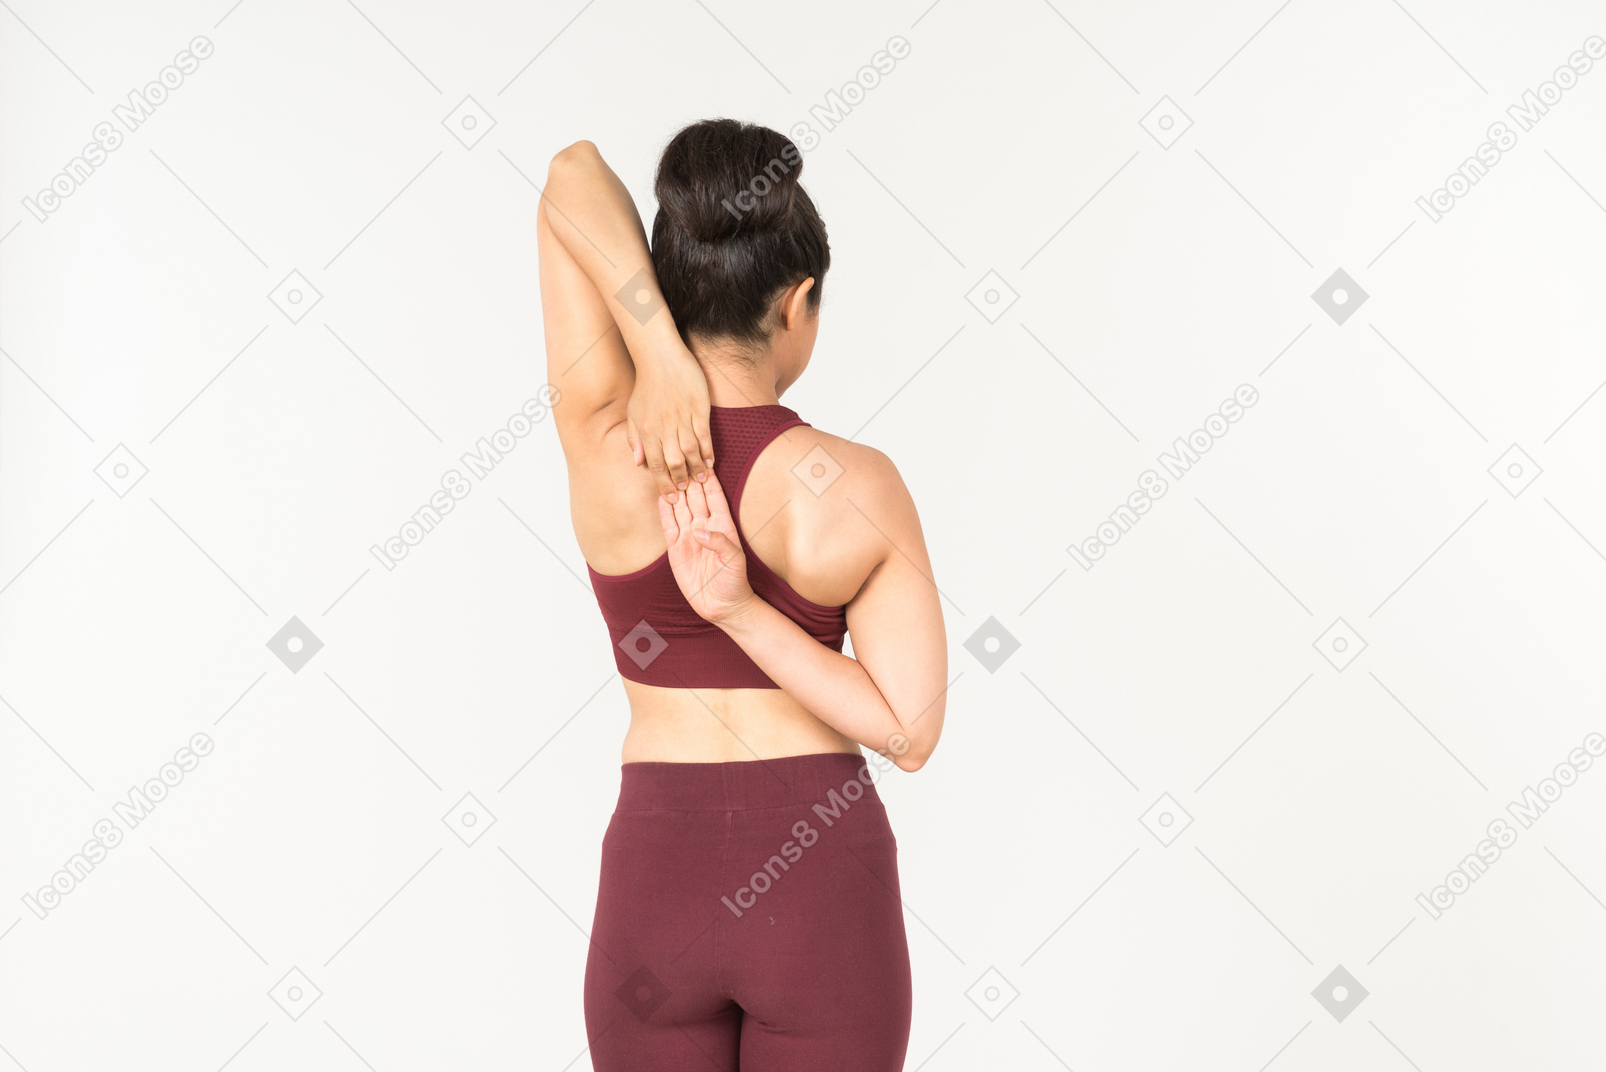 Young indian woman in sportswear holding hands crossed behind the back